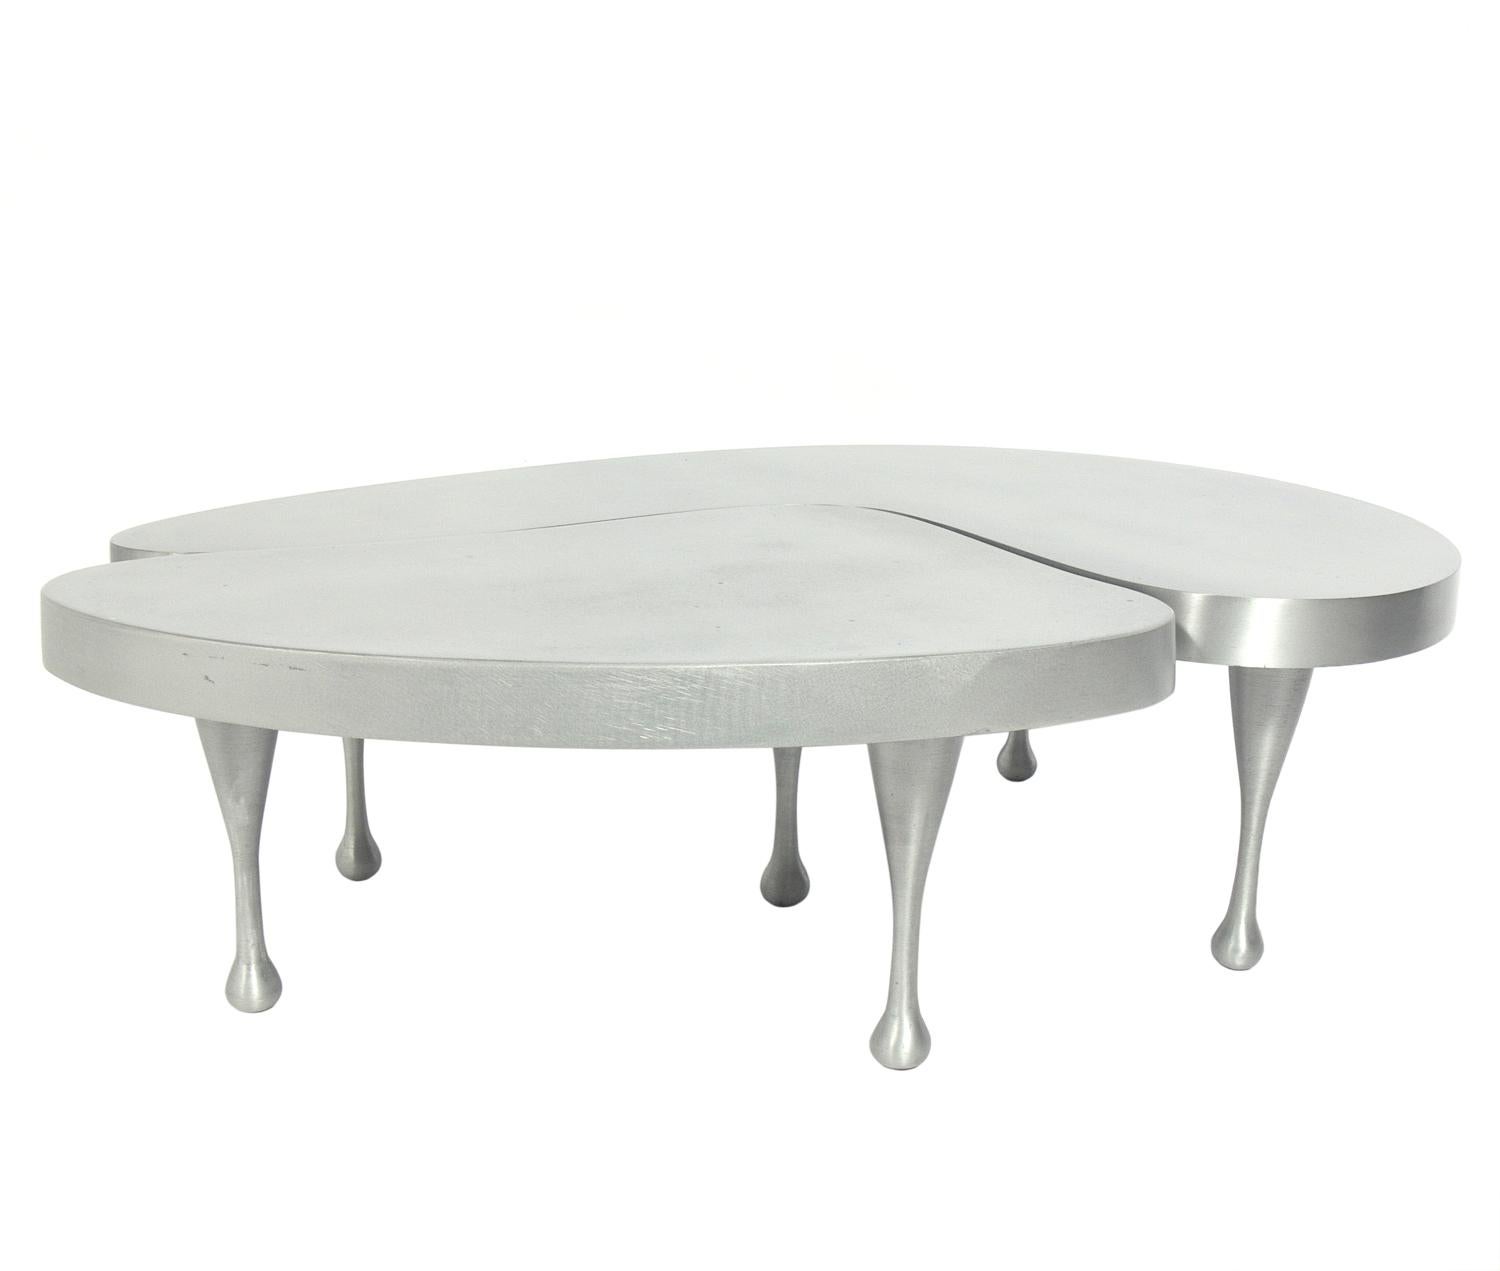 Pair of Biomorphic low slung cast aluminum tables, designed by Frederick Kiesler in the 1930s, these are a re-edition made in conjunction with Lillian Kiesler for the Jason McCoy Gallery, circa 1990s. The larger table measures 10